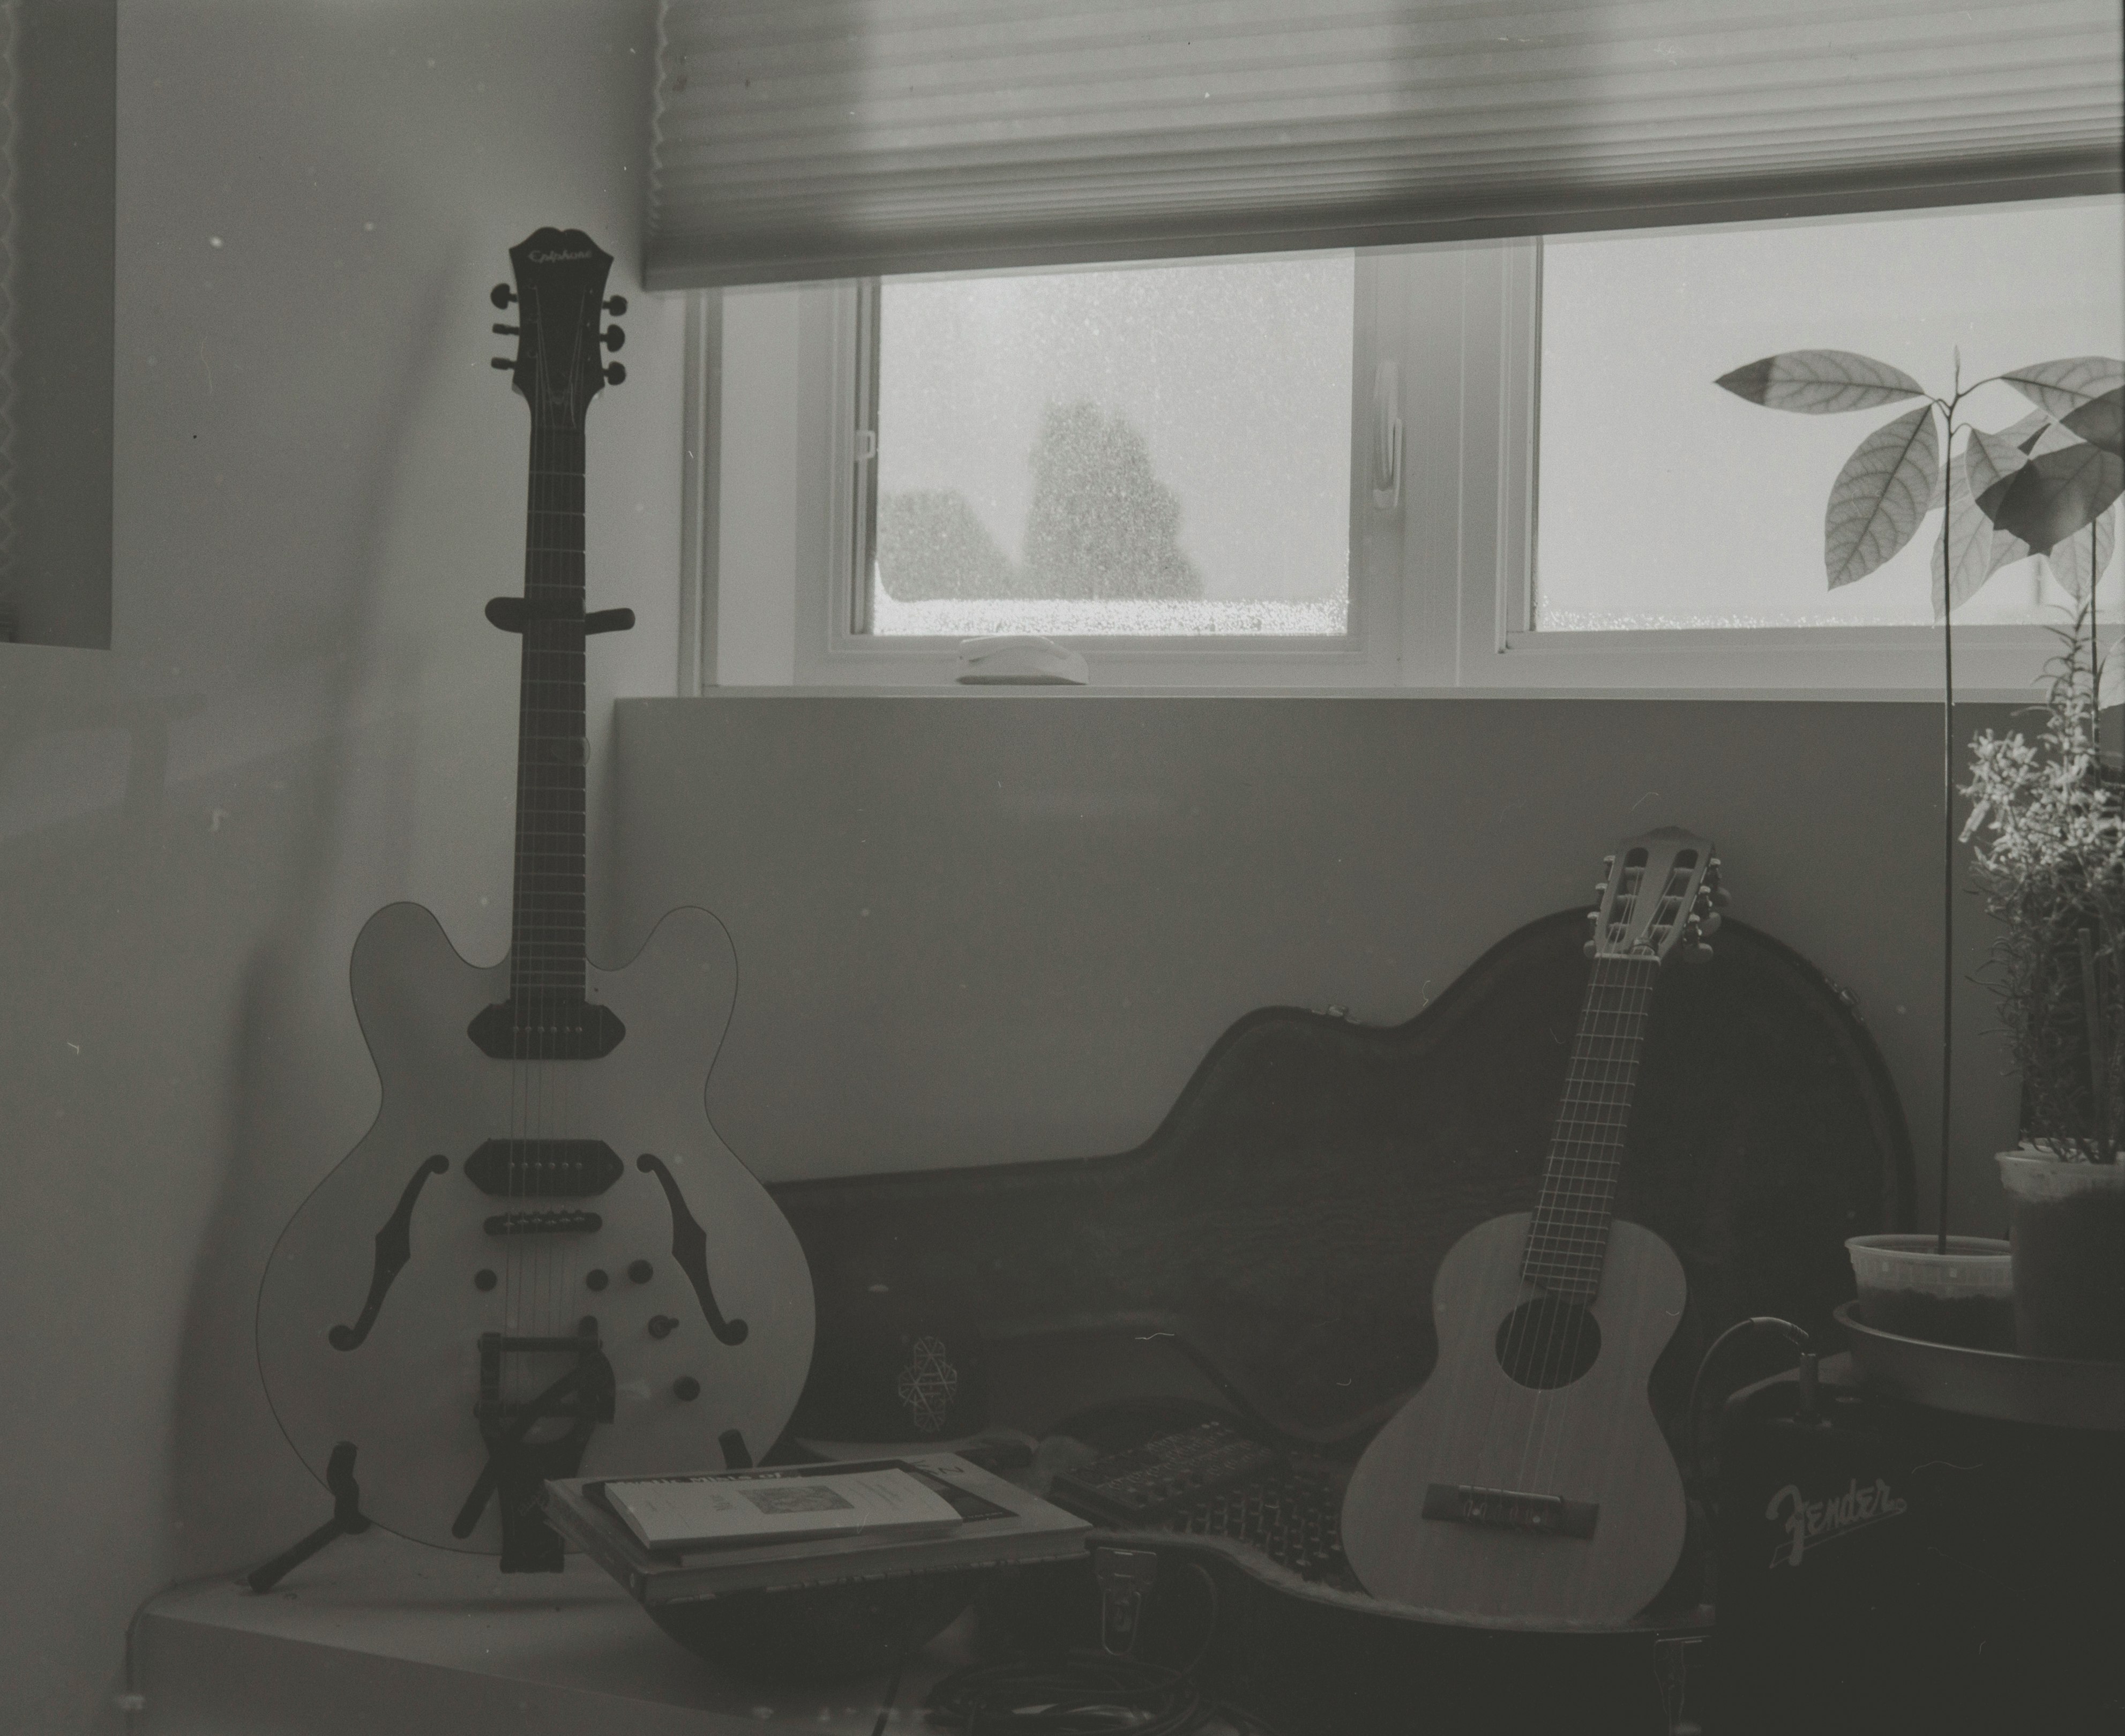 two guitars leaning on chairs and table inside room